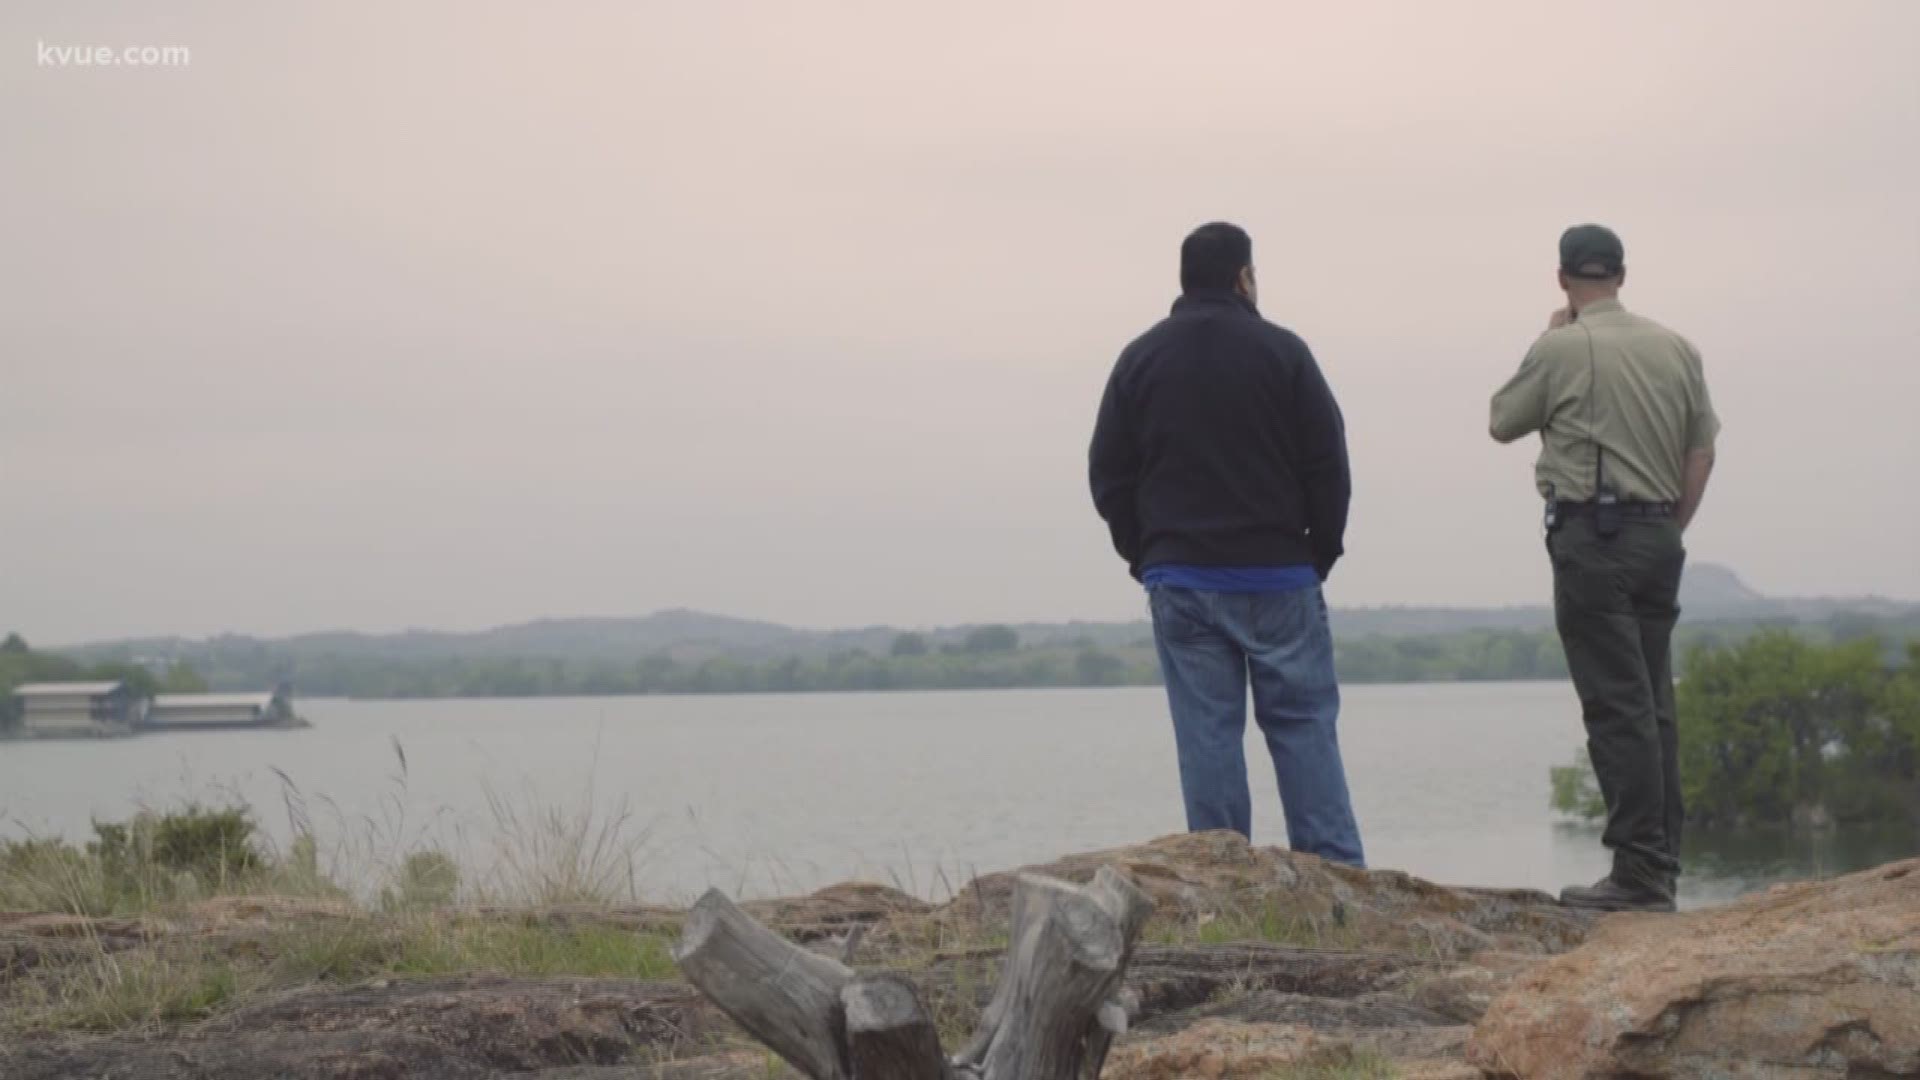 This episode of Albert's Texas Treasures takes you to Inks Lake State Park, an adventurer's paradise just an hour west of Austin.